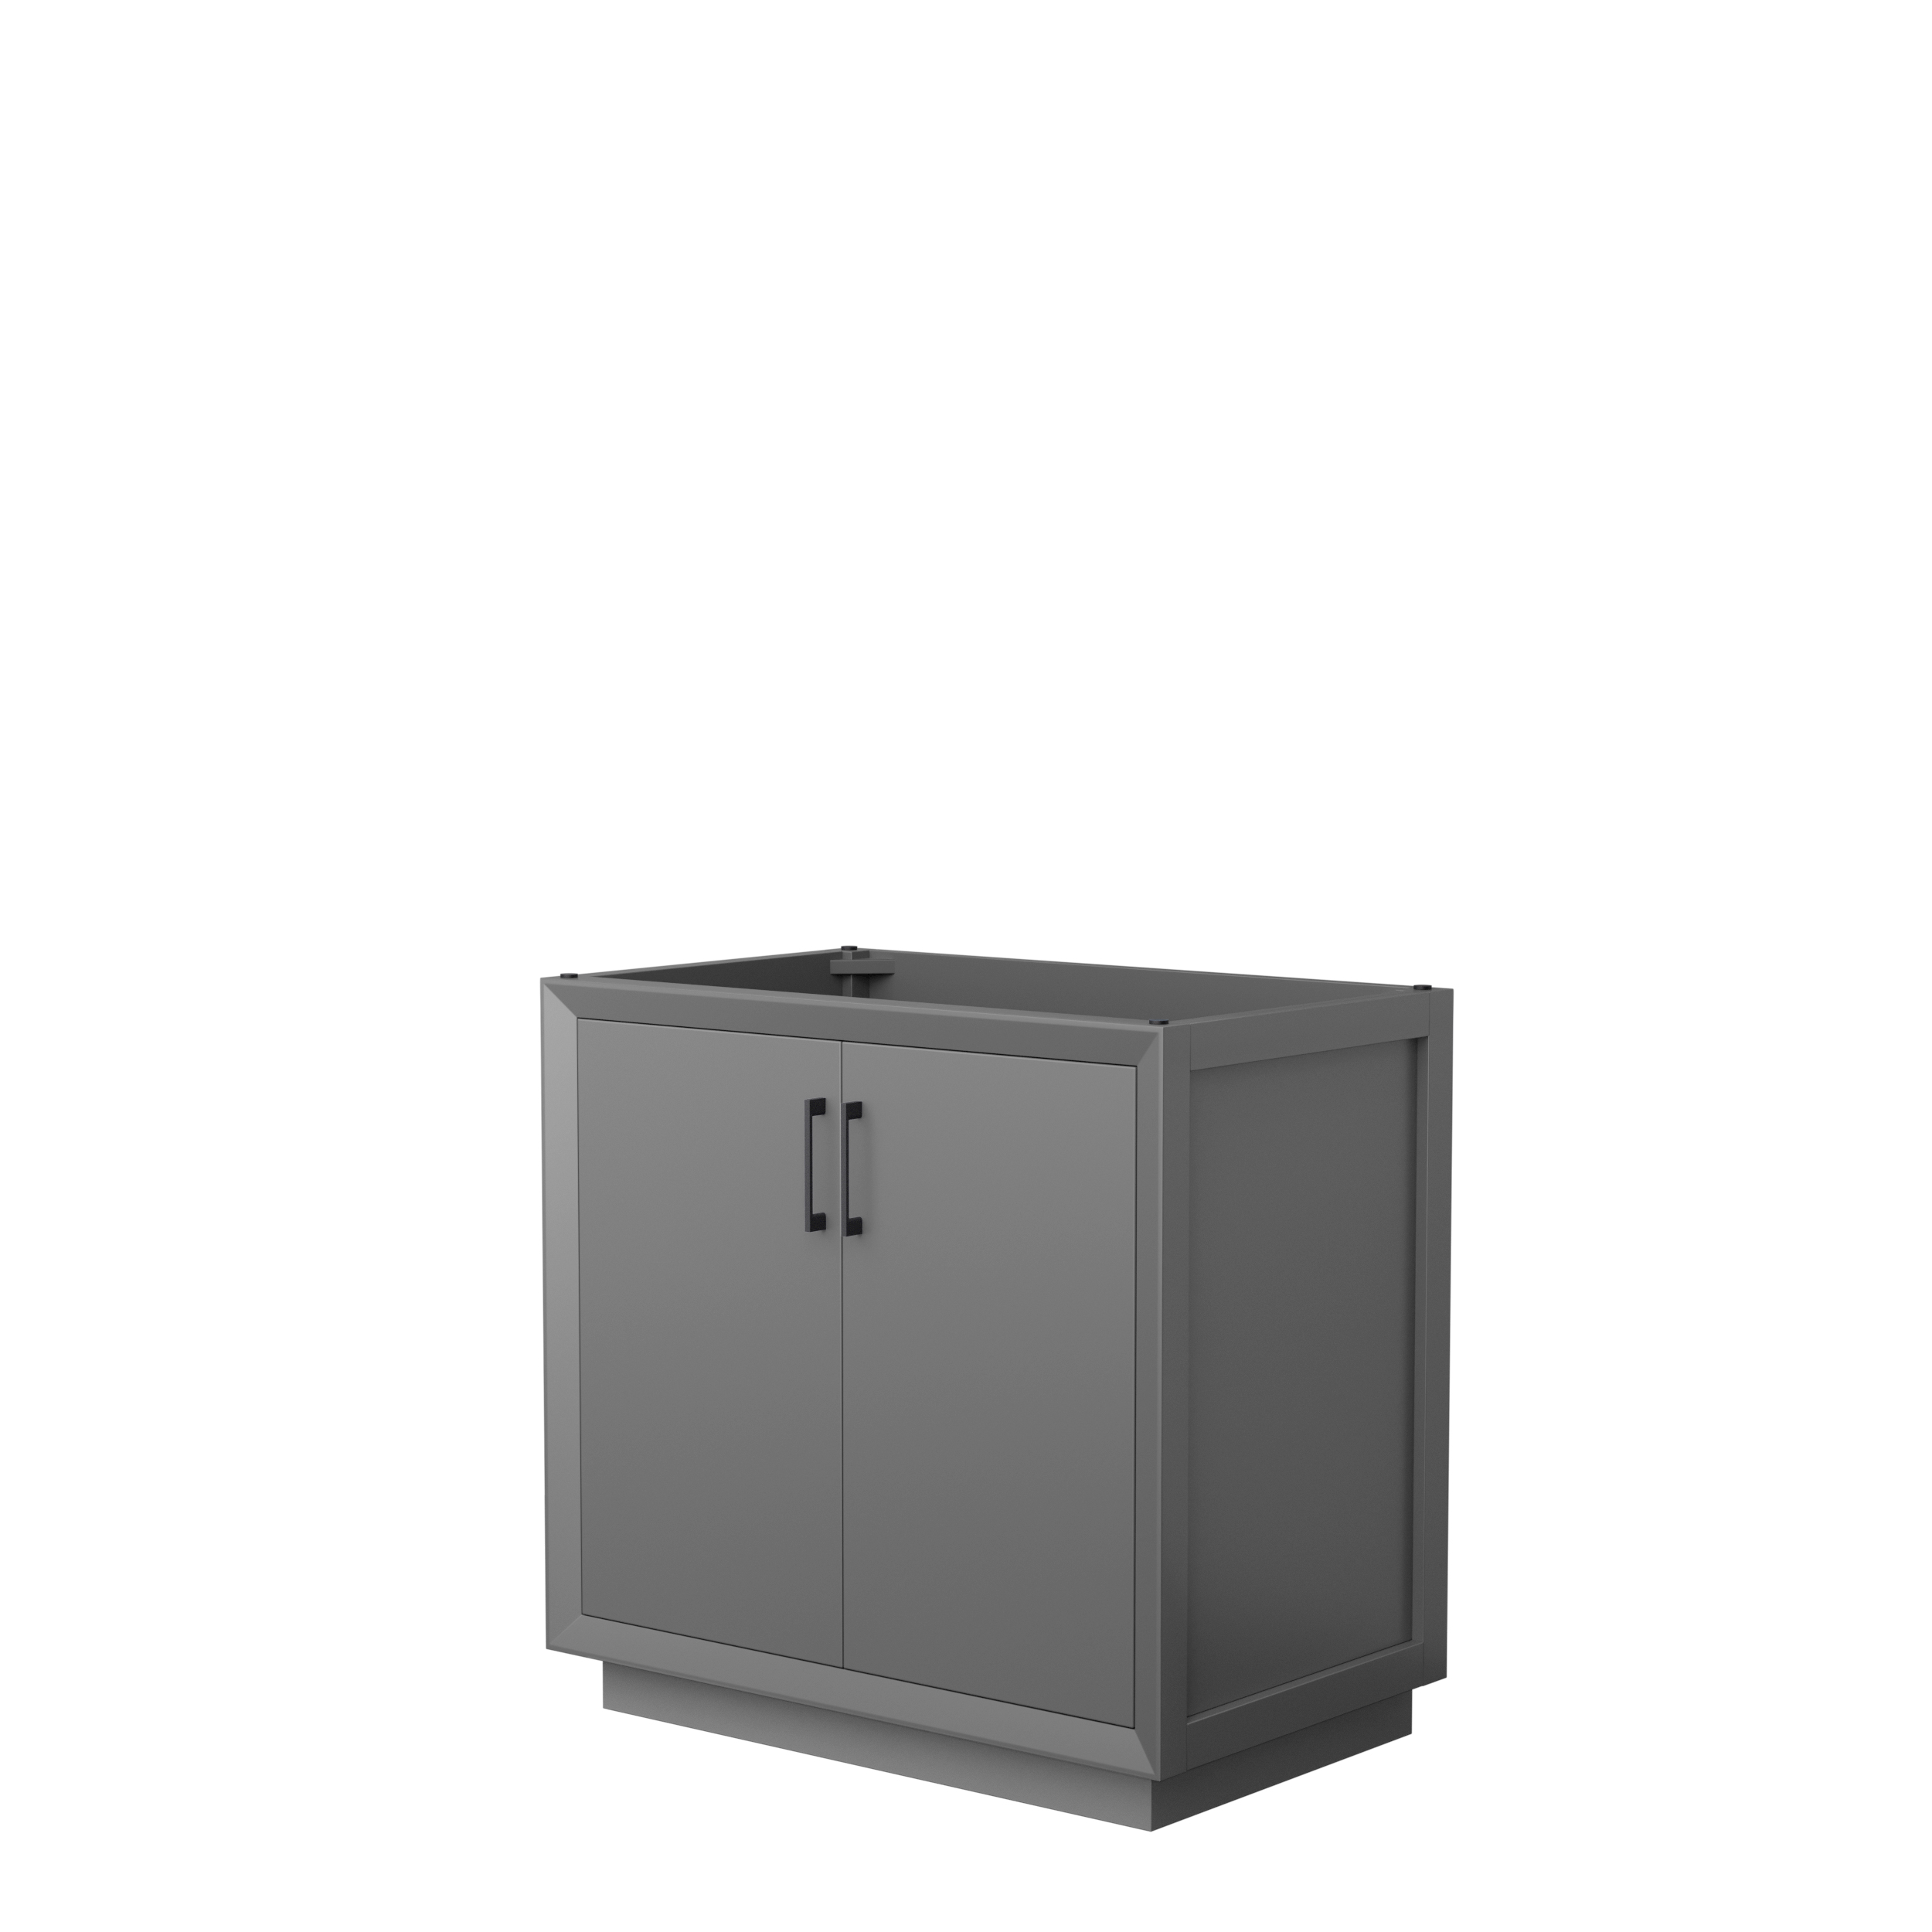 36 Transitional Vanity Base in Dark Grey, No countertop, with 3 Hardware Options